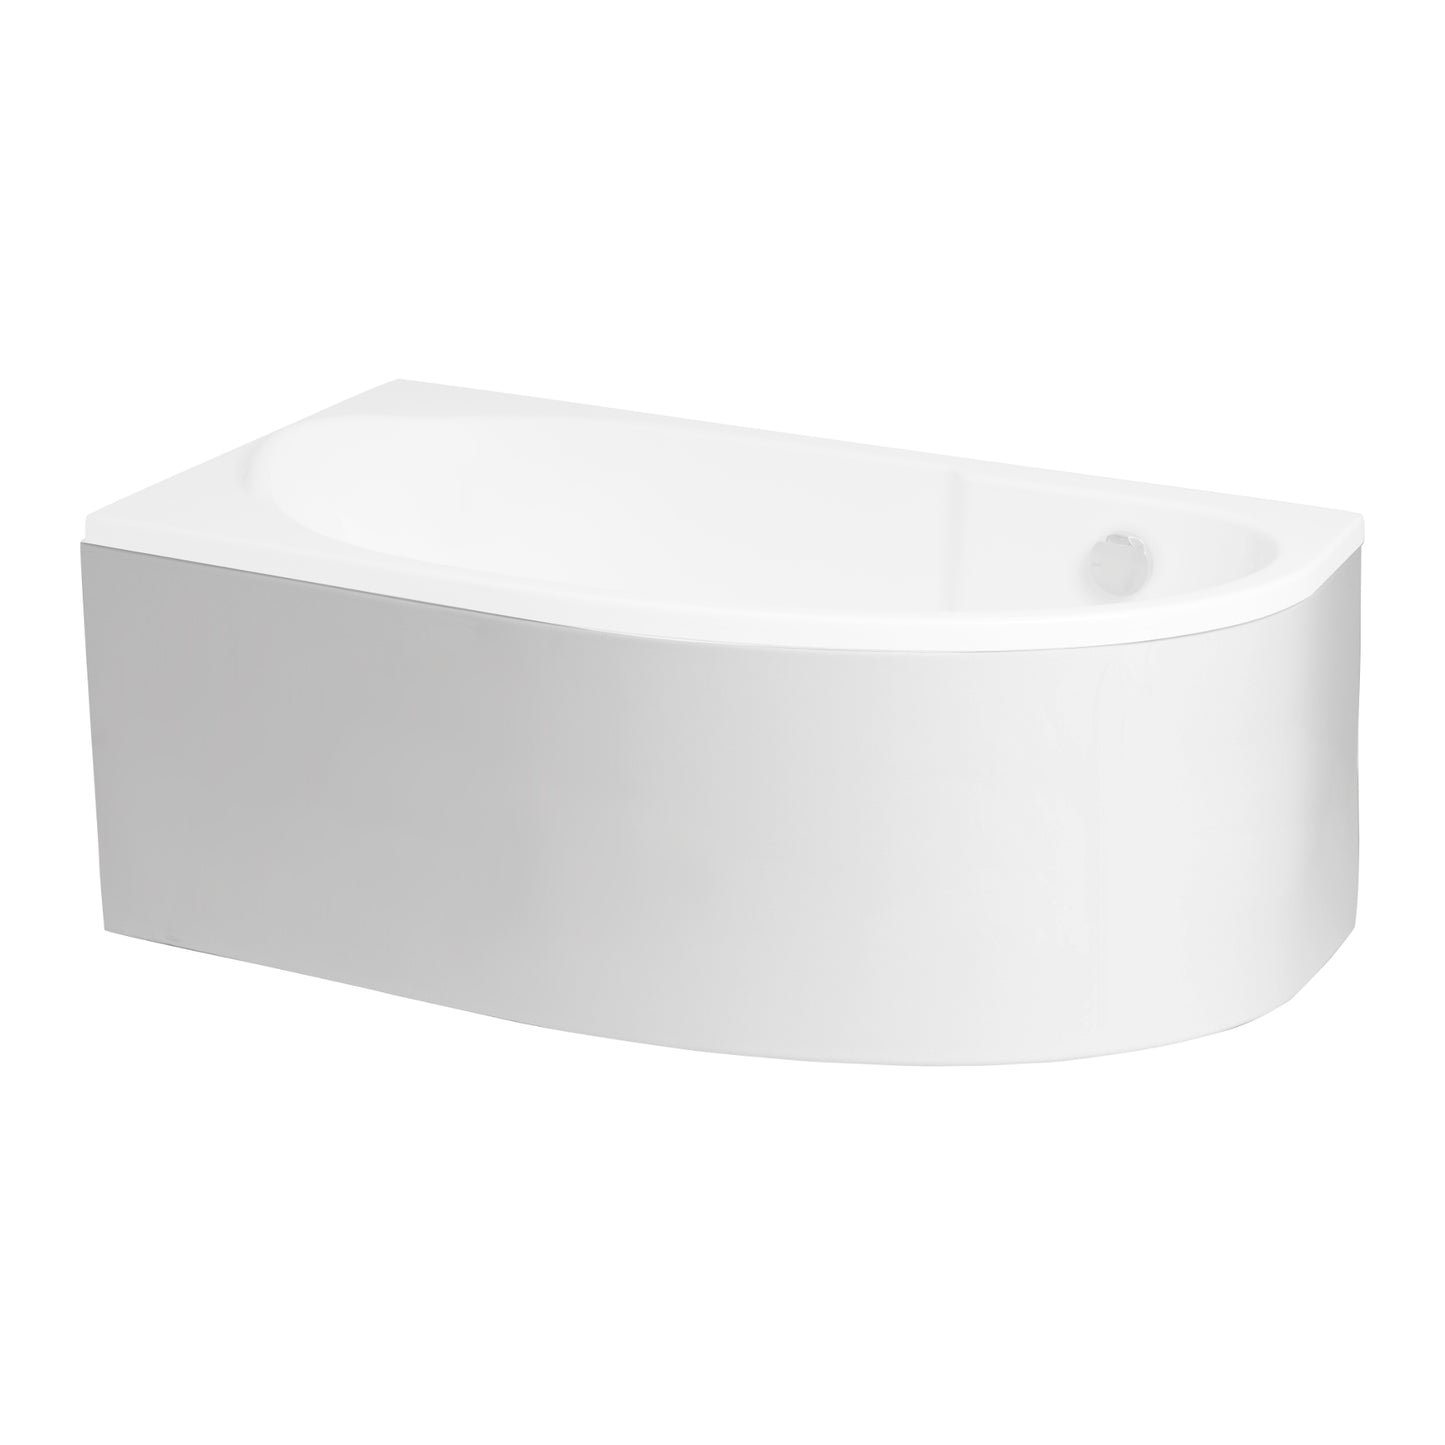 Load image into Gallery viewer, Acrylic housing for corner asymmetrical bathtub MIKI
